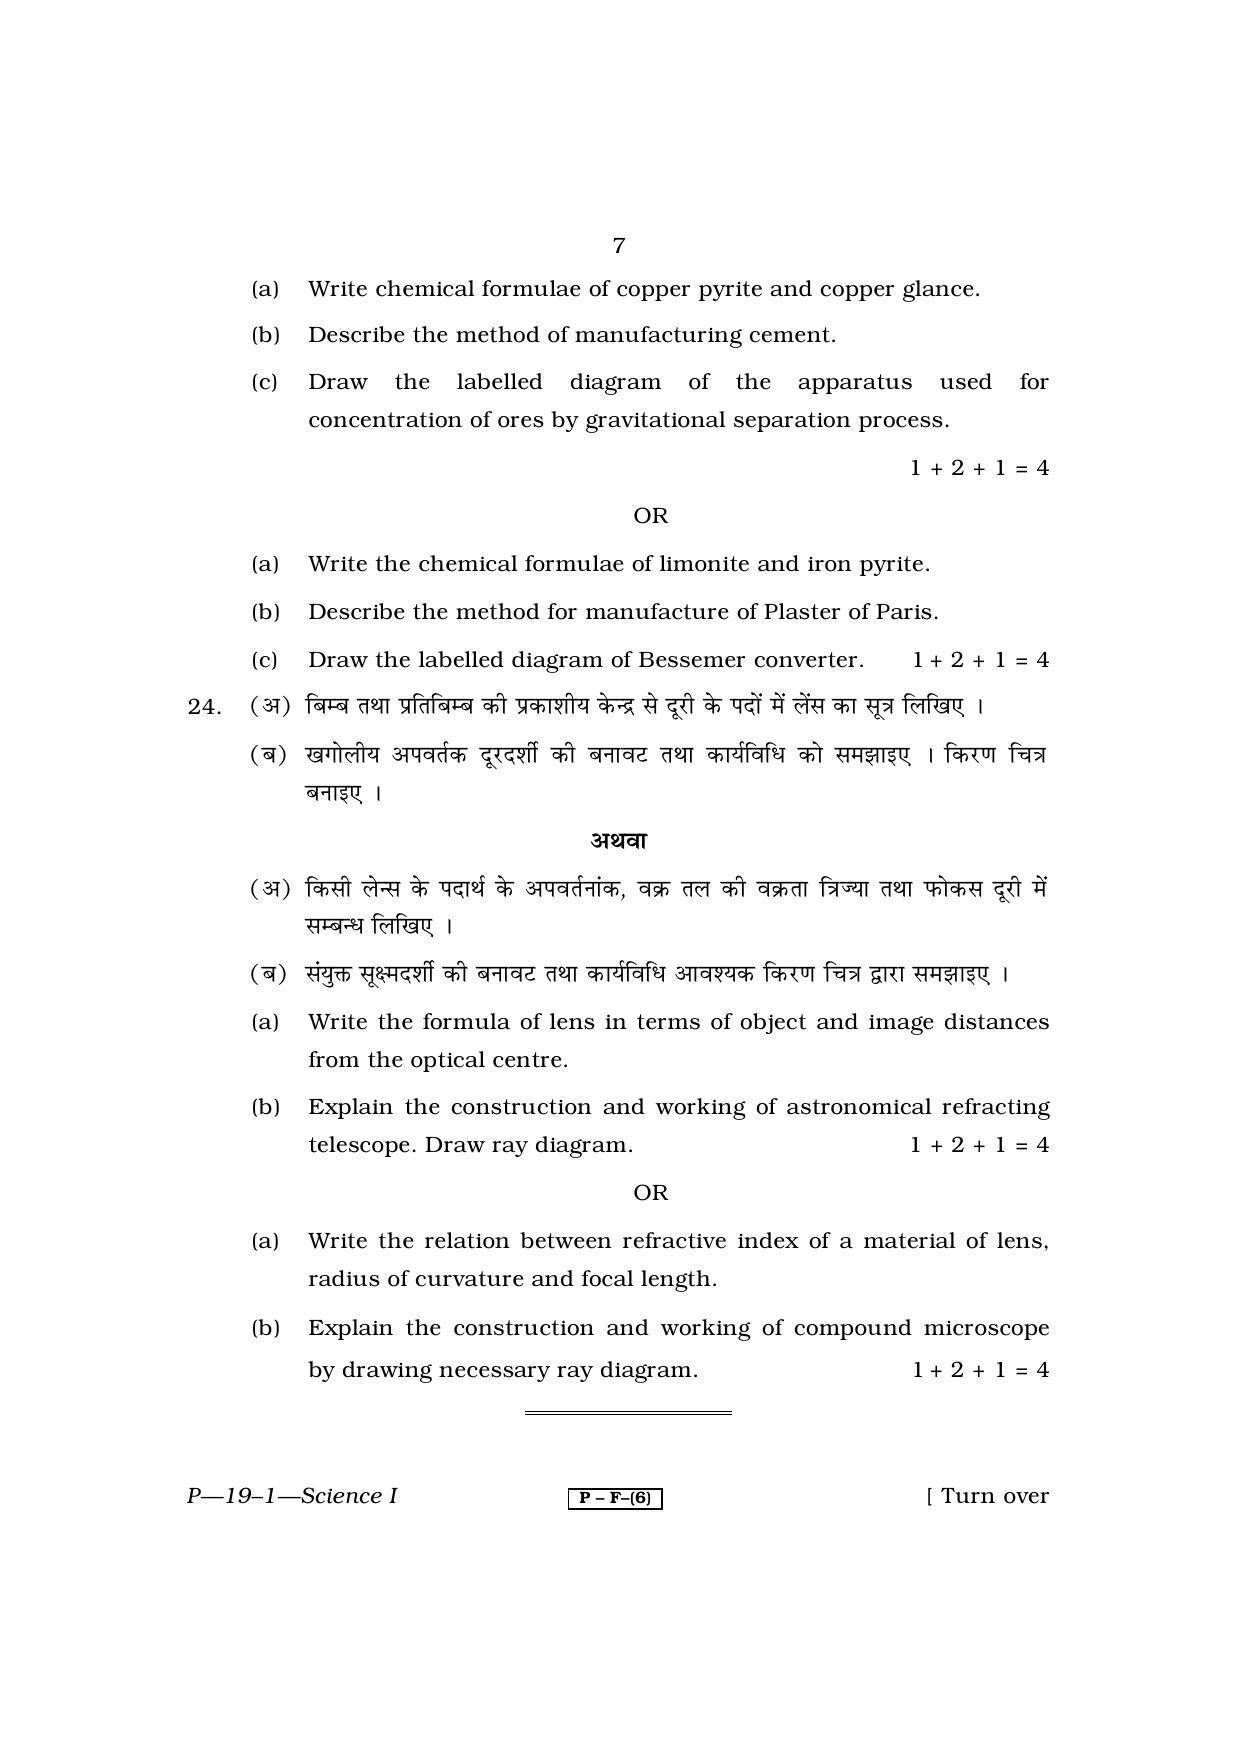 RBSE 2011 Science Praveshika Question Paper - Page 7